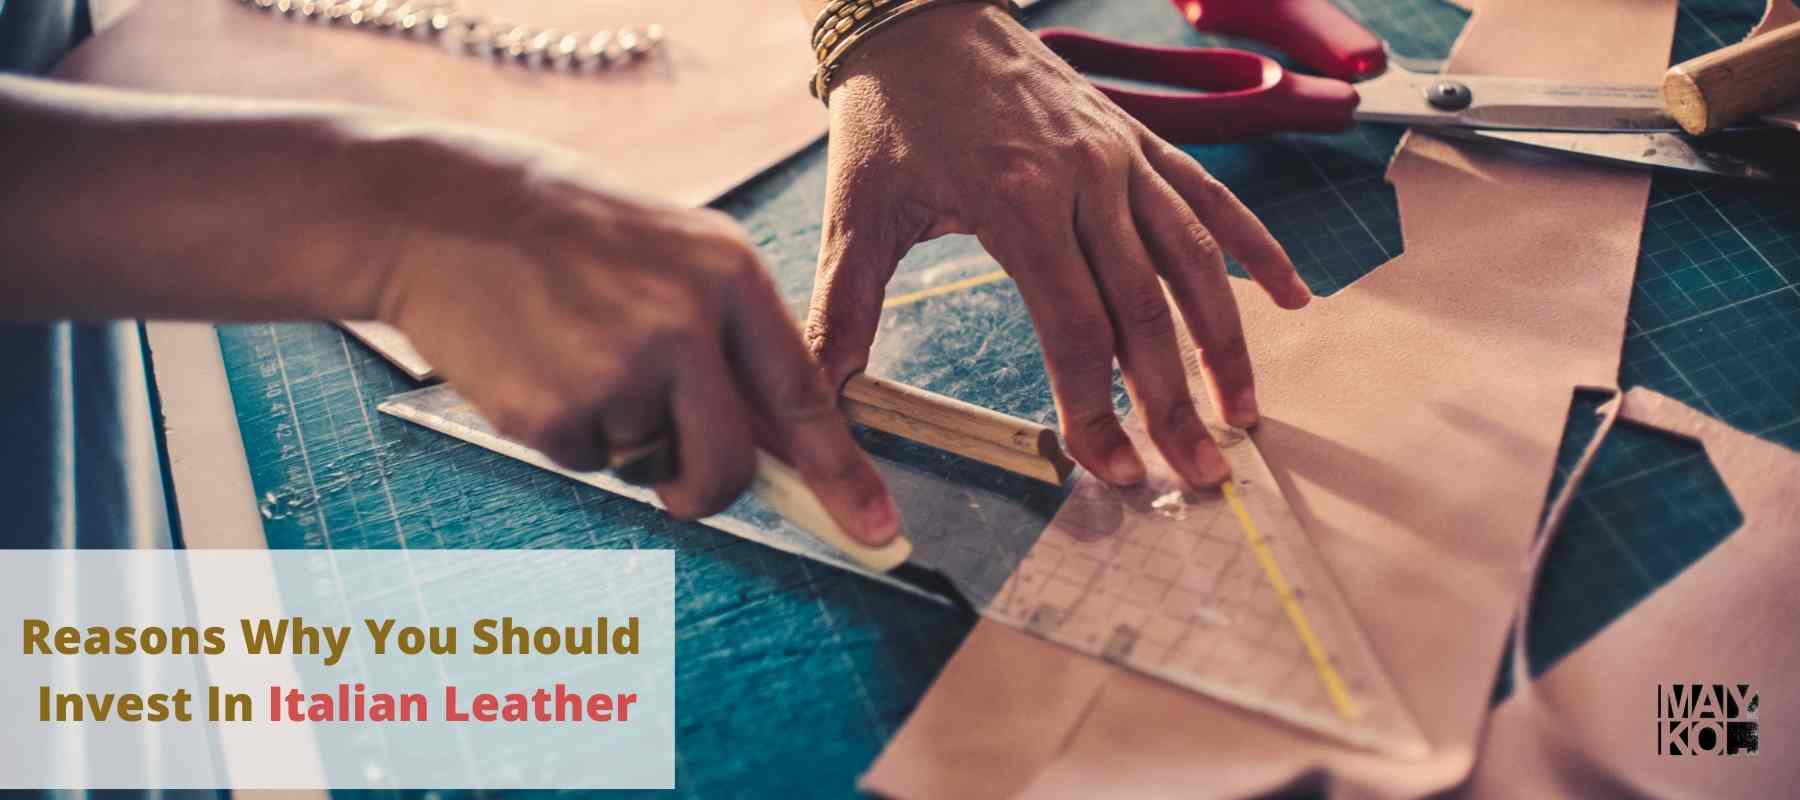 5 Reasons Why You Should Invest In Italian Leather